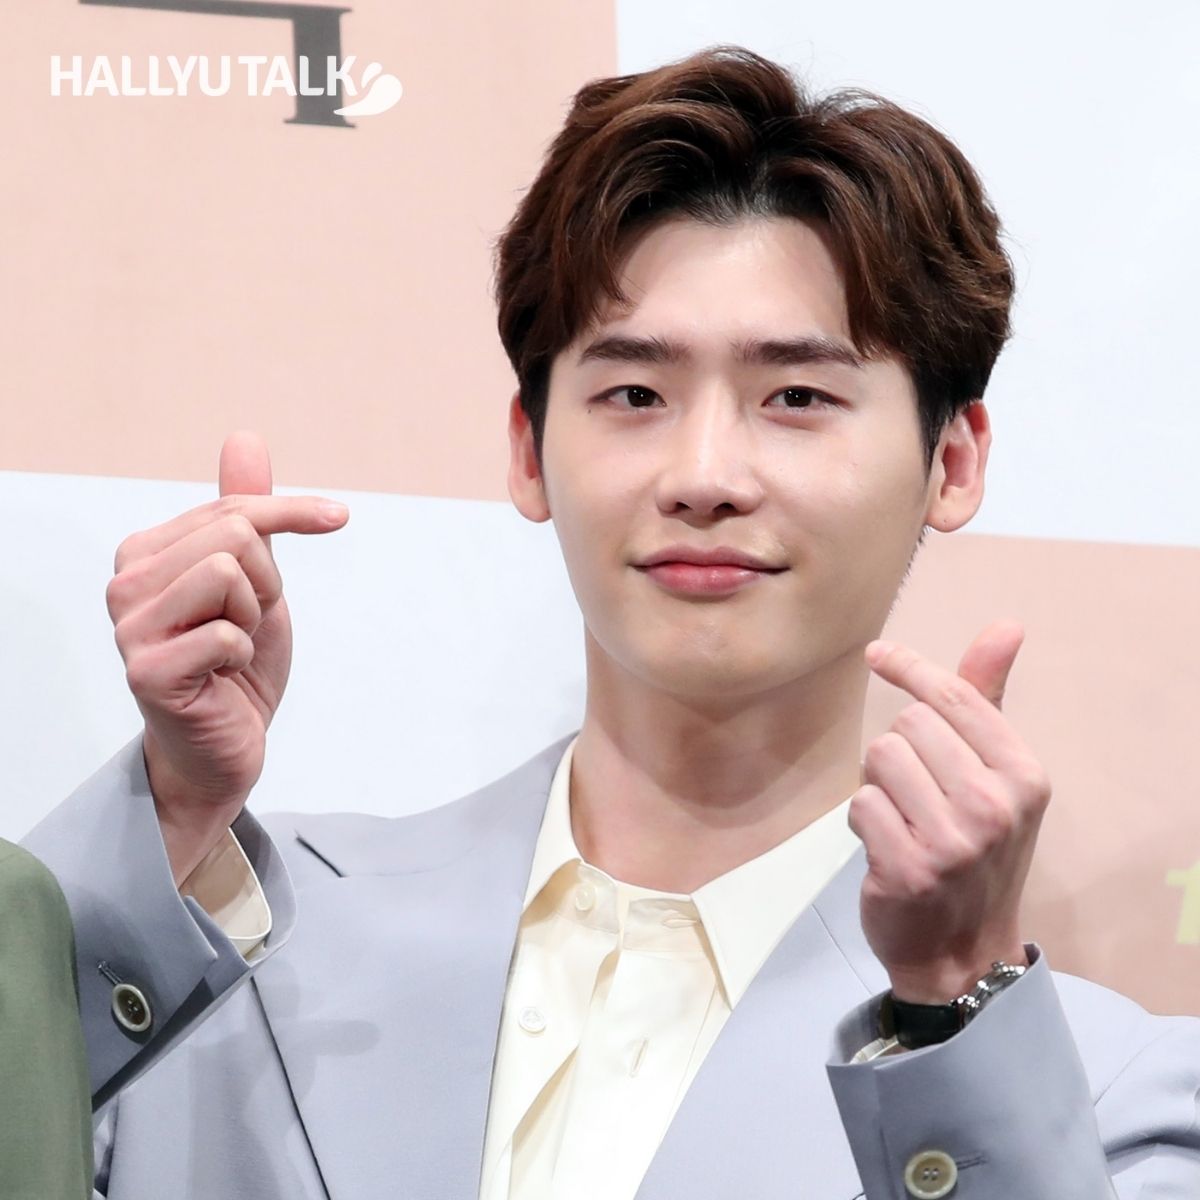 Lee Jong Suk dishes on upcoming projects 'Decibel' & 'Big Mouth' as well as what attracted him to these roles